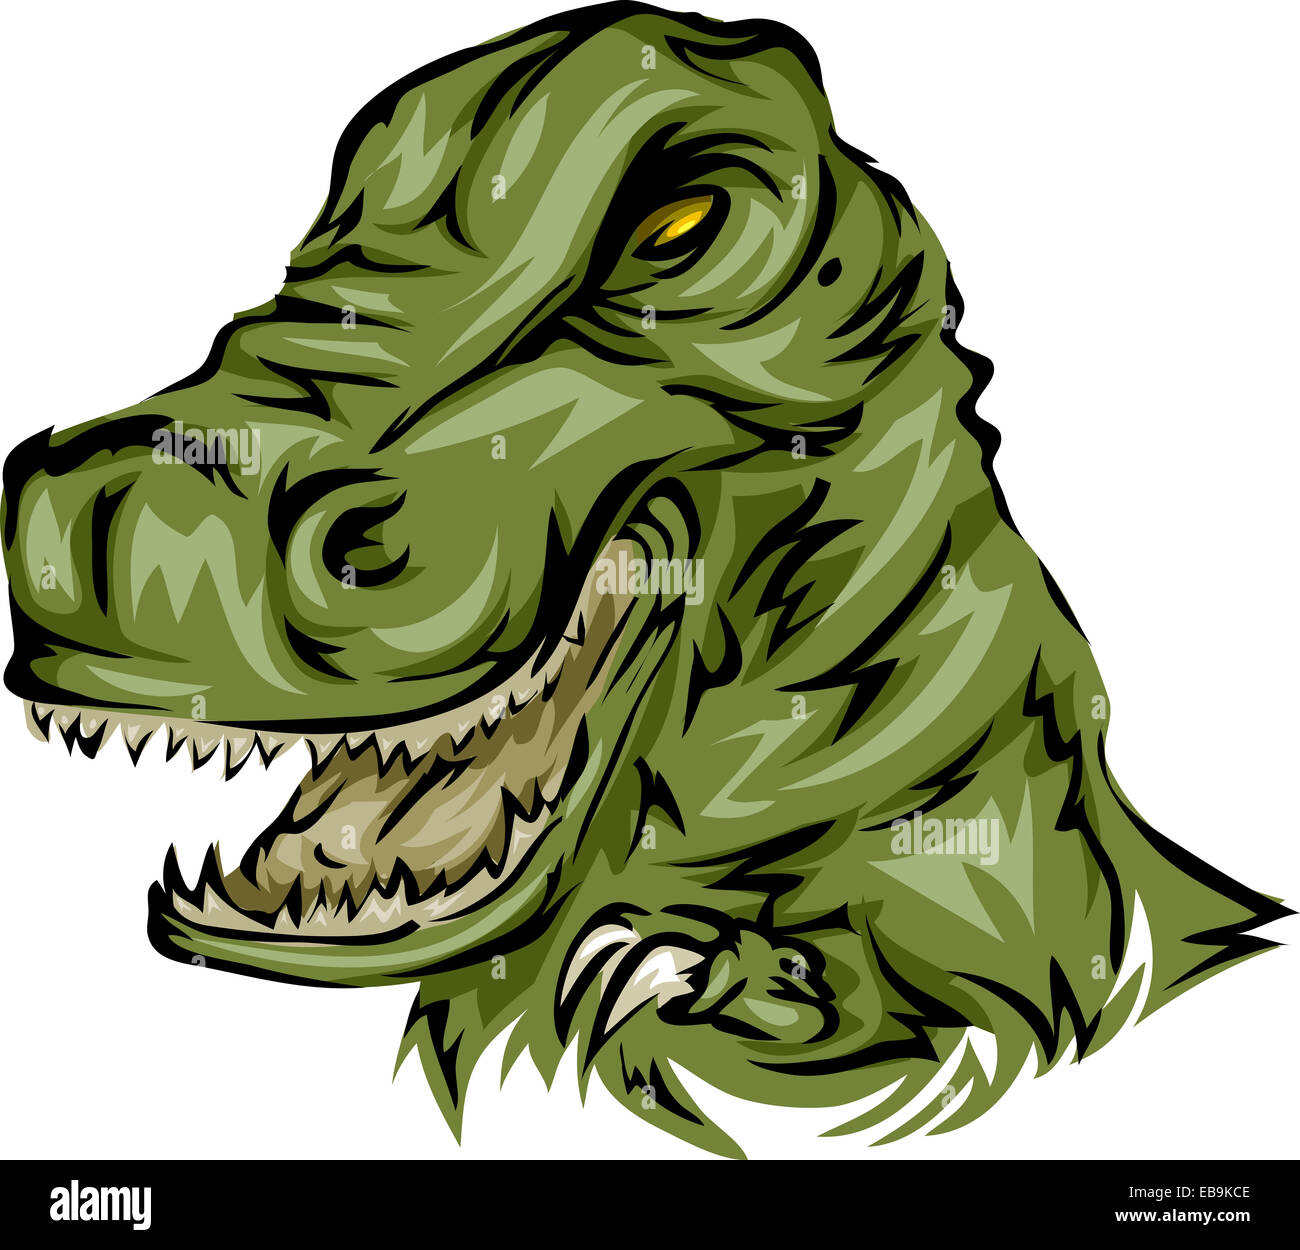 Illustration Featuring a T-Rex Stock Photo